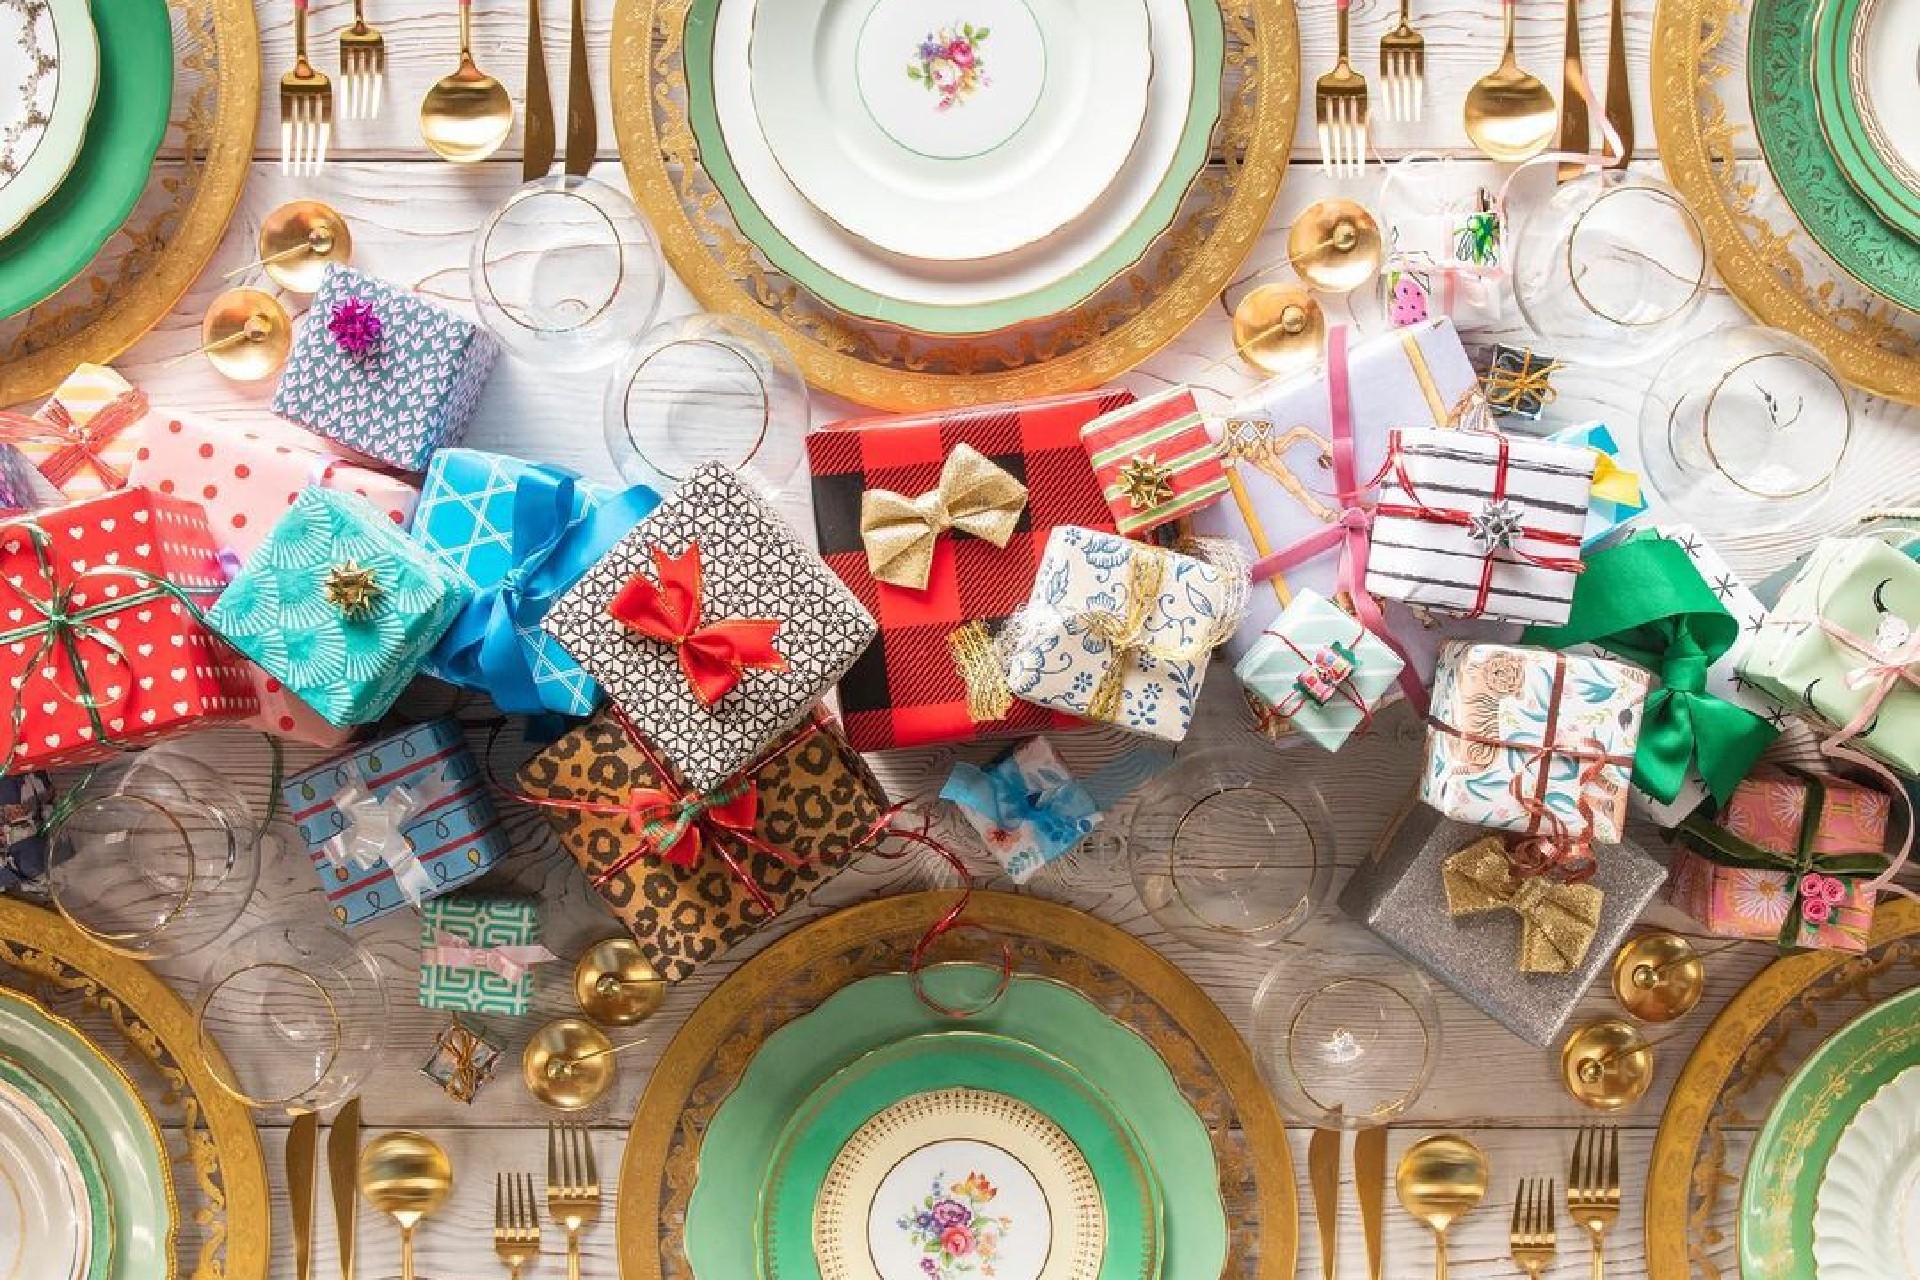 45 Christmas Table Decorations & Place Settings - Holiday Tablescapes